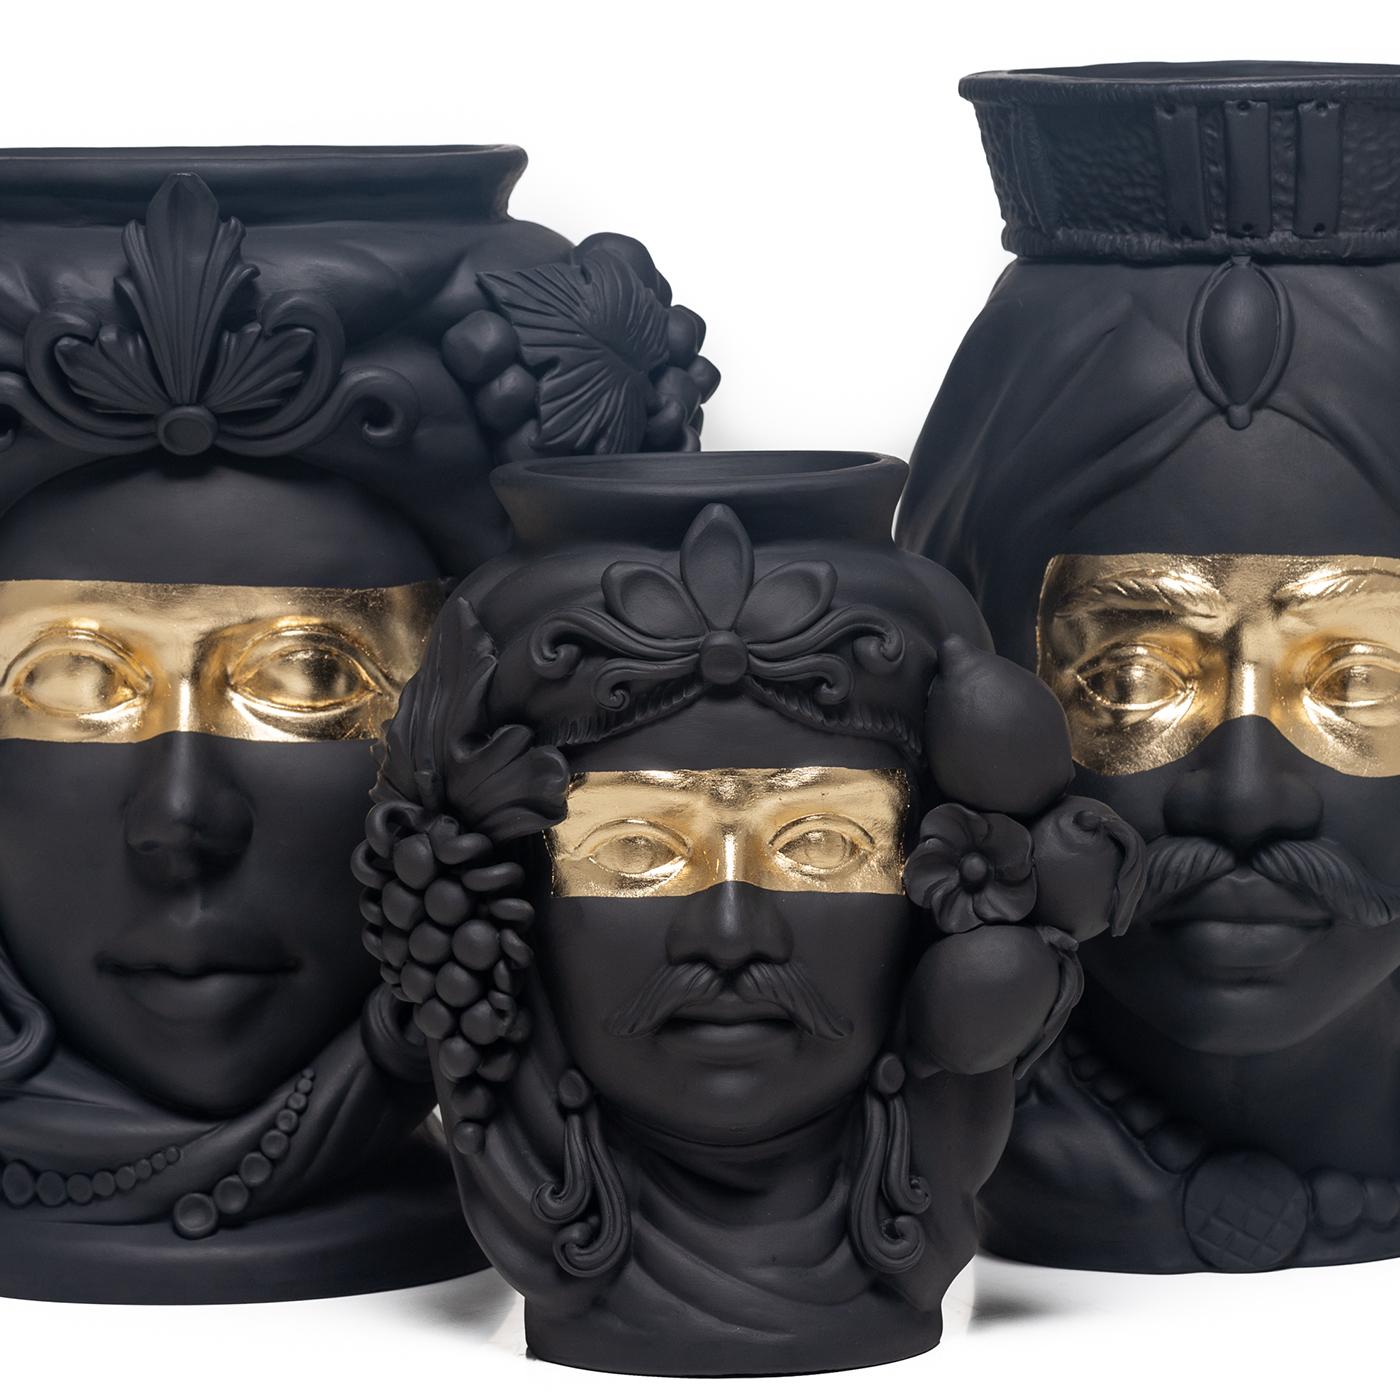 The grandeur of Sicily's Arab domination is celebrated in this anthropomorphic terracotta vase that depicts a Sicilian woman handcrafted by master ceramicist Stefania Boemi. The ceramic is hand-glaze in a deep matte black that enhances the